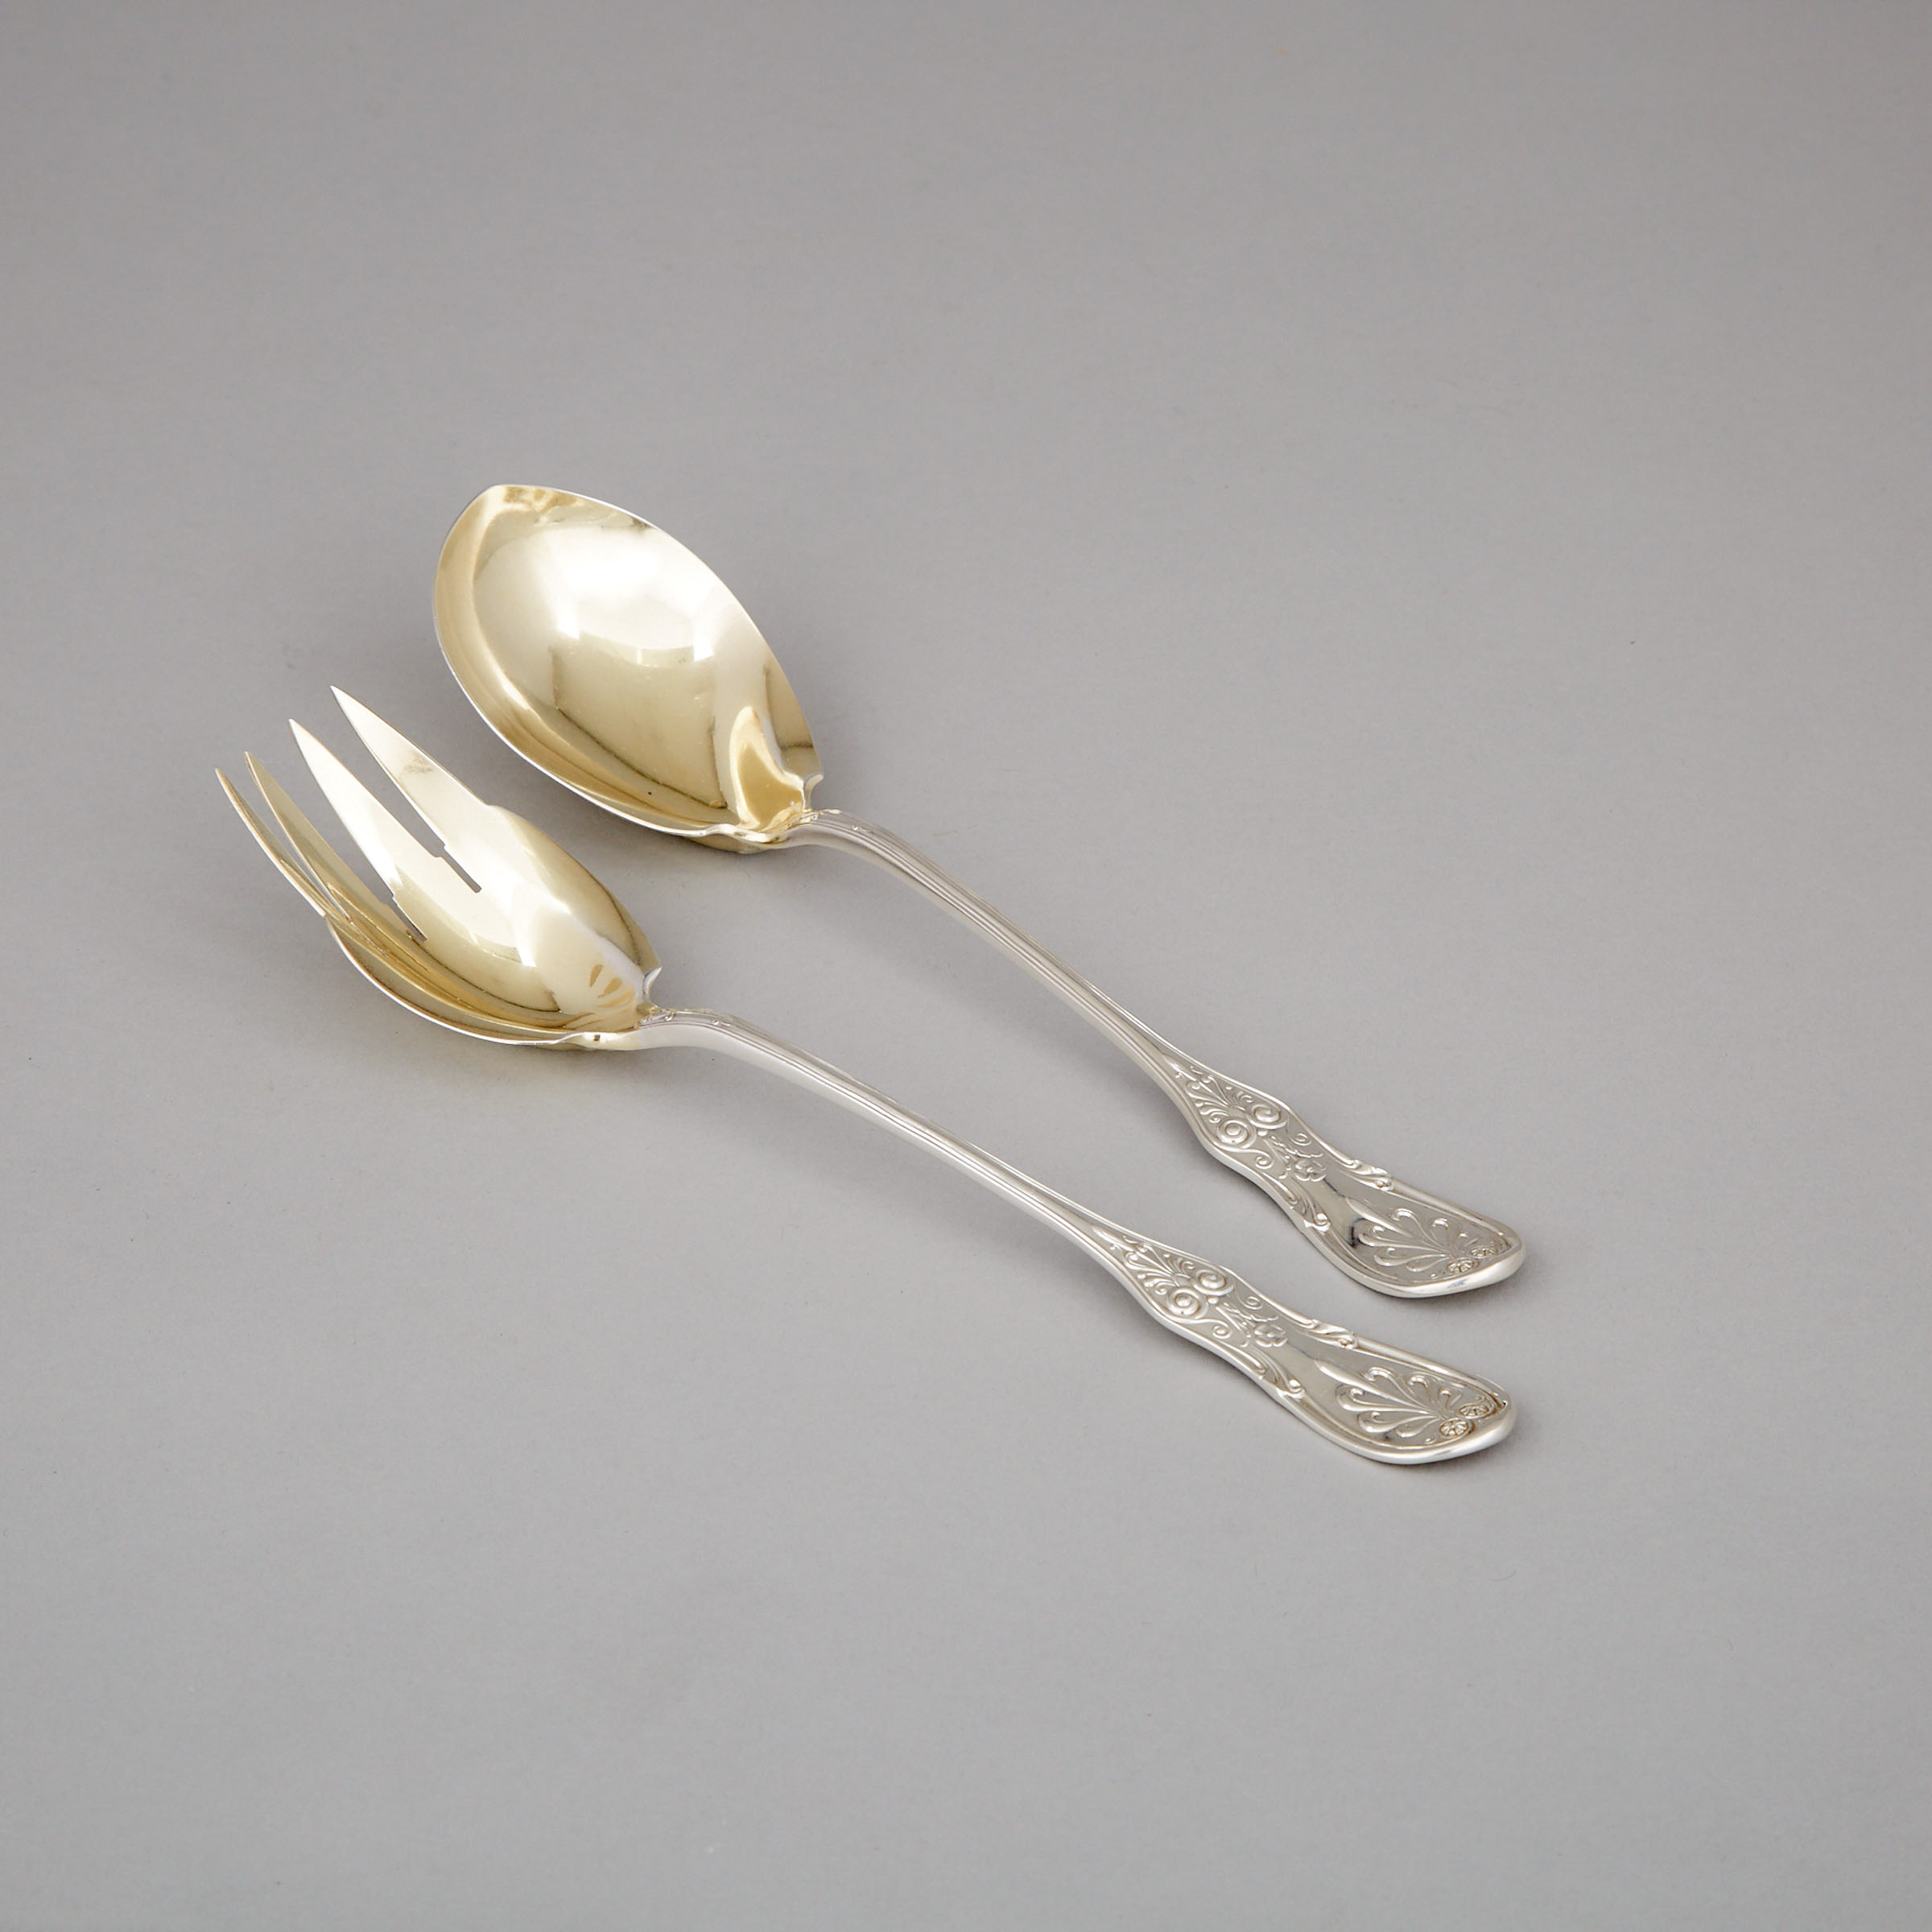 American Silver 'Saratoga' Pattern Serving Spoon and Fork, Tiffany & Co., New York, N.Y., 20th century